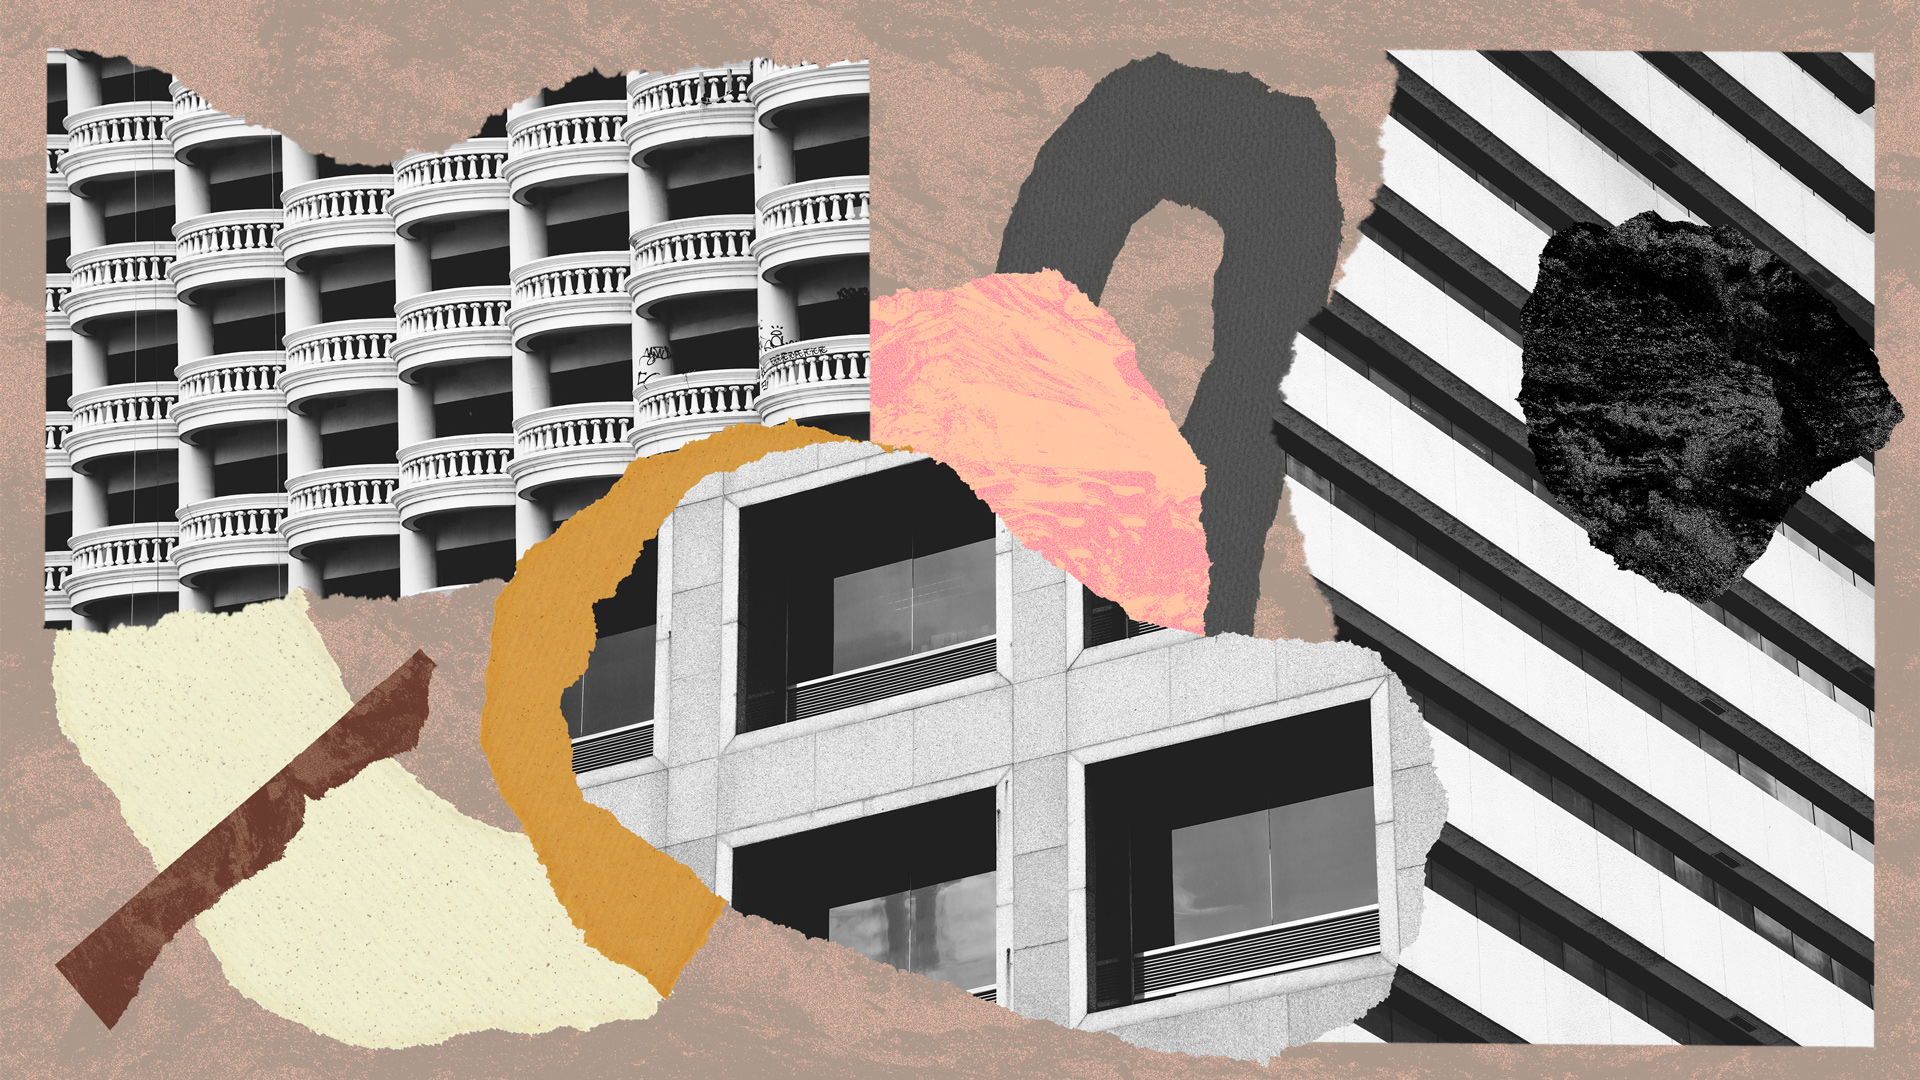 Collage of black and white buildings and textures